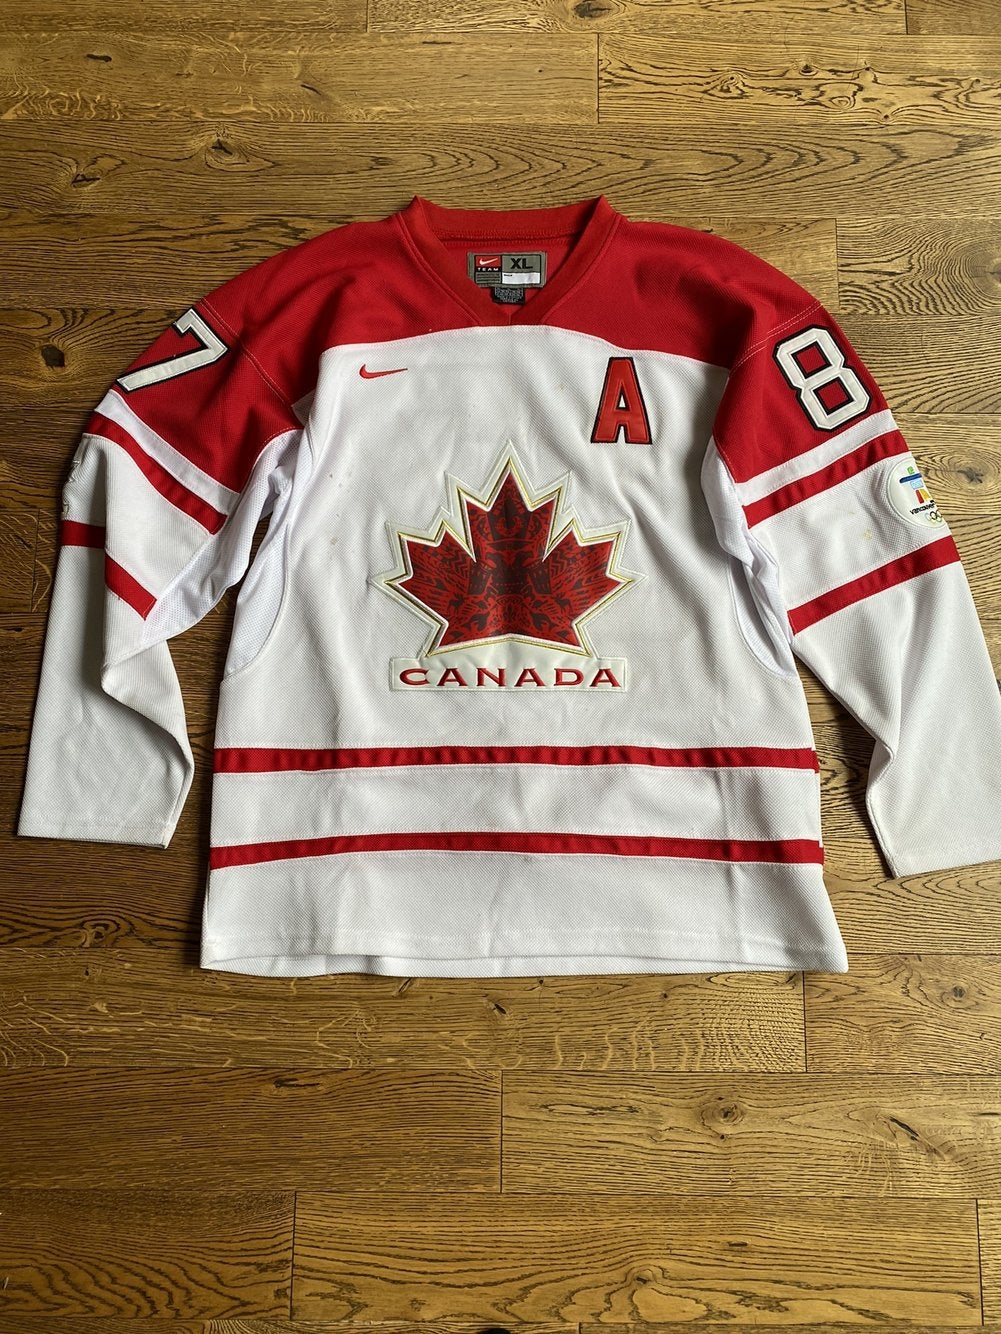 Sidney Crosby - Signed White Team Canada 2010 Olympic Jersey - NHL Auctions